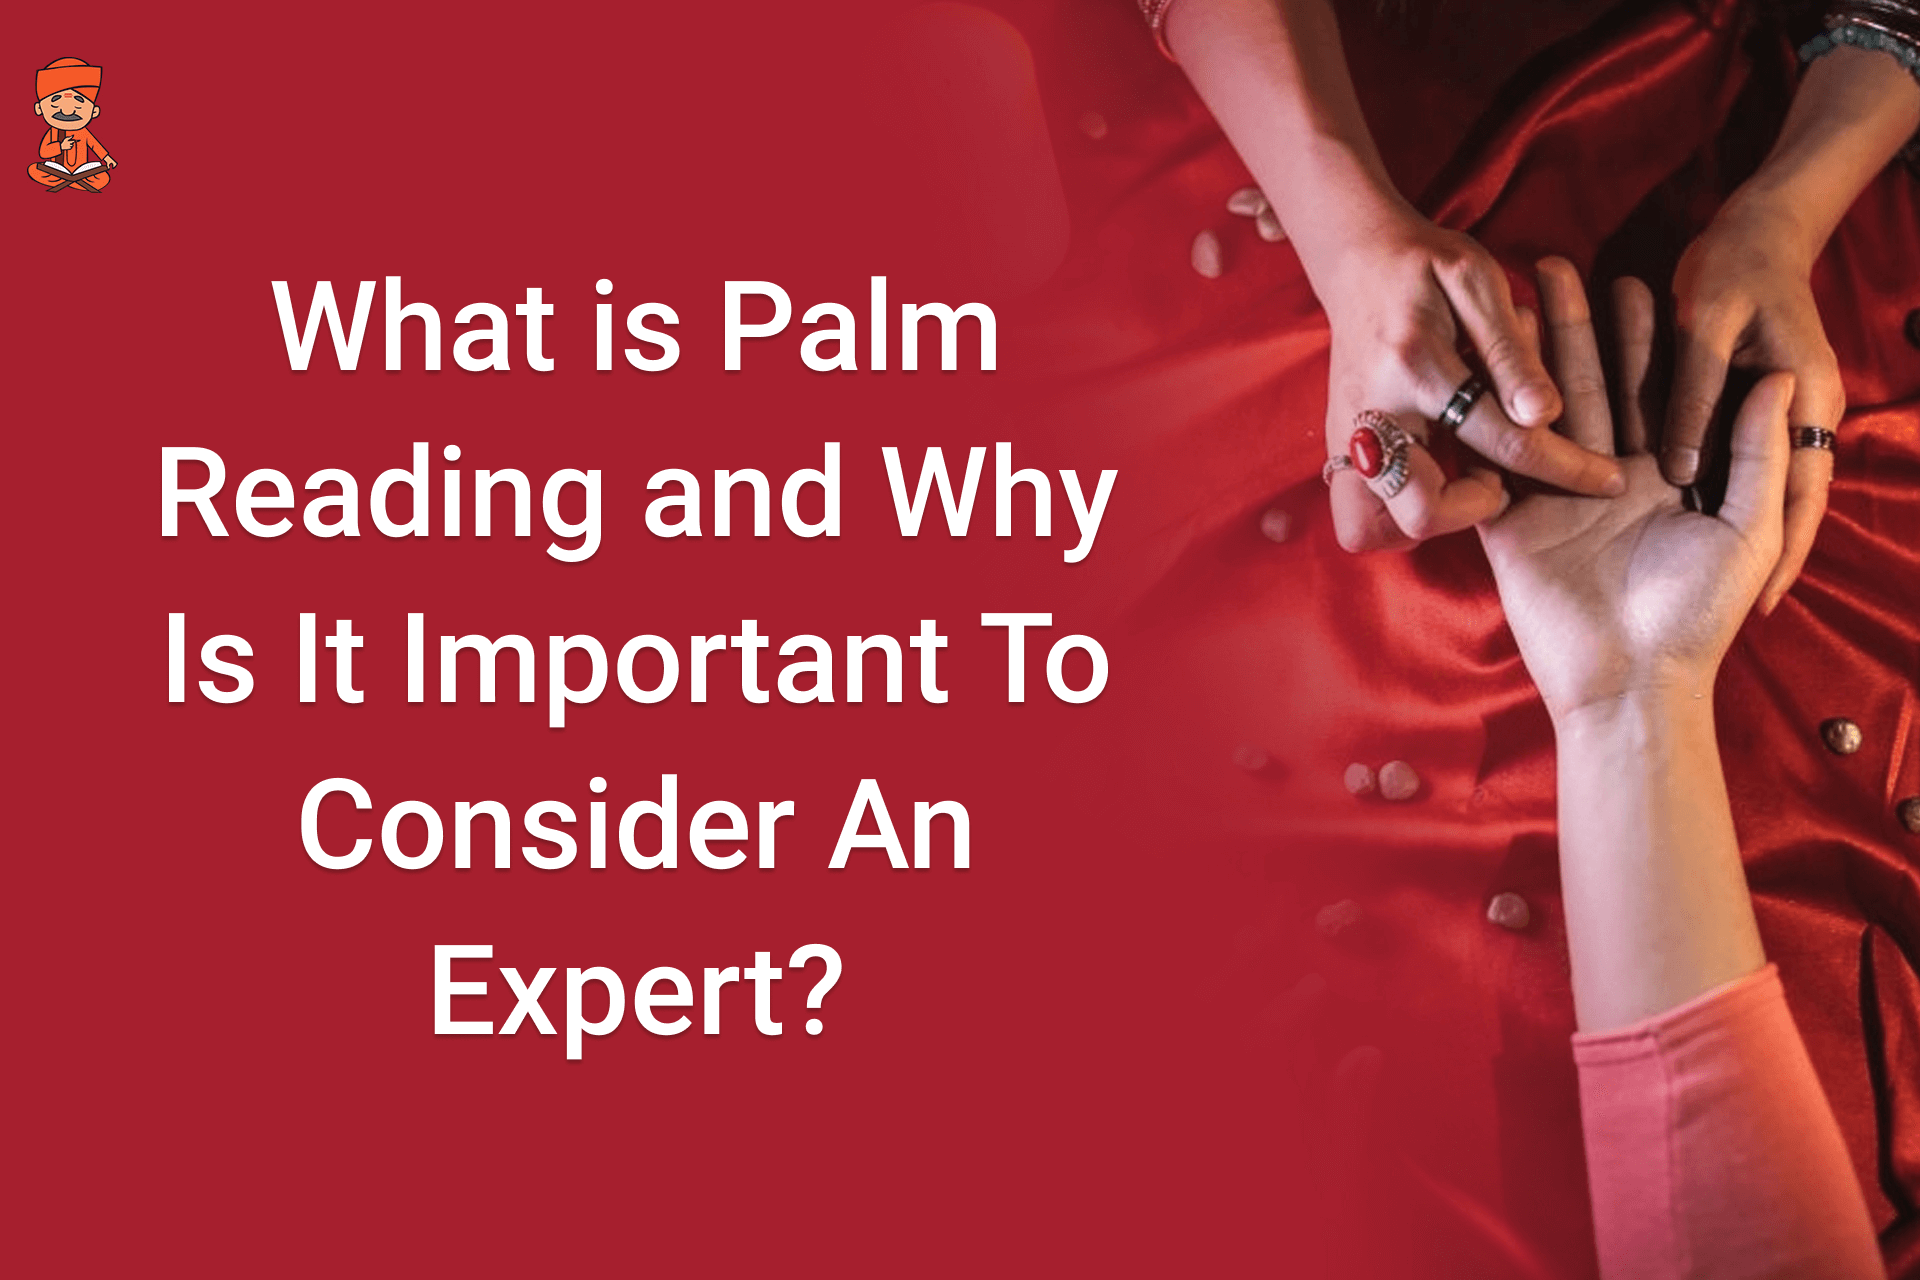 What is Palm Reading Online and Why Is It Important To Consider An Expert?